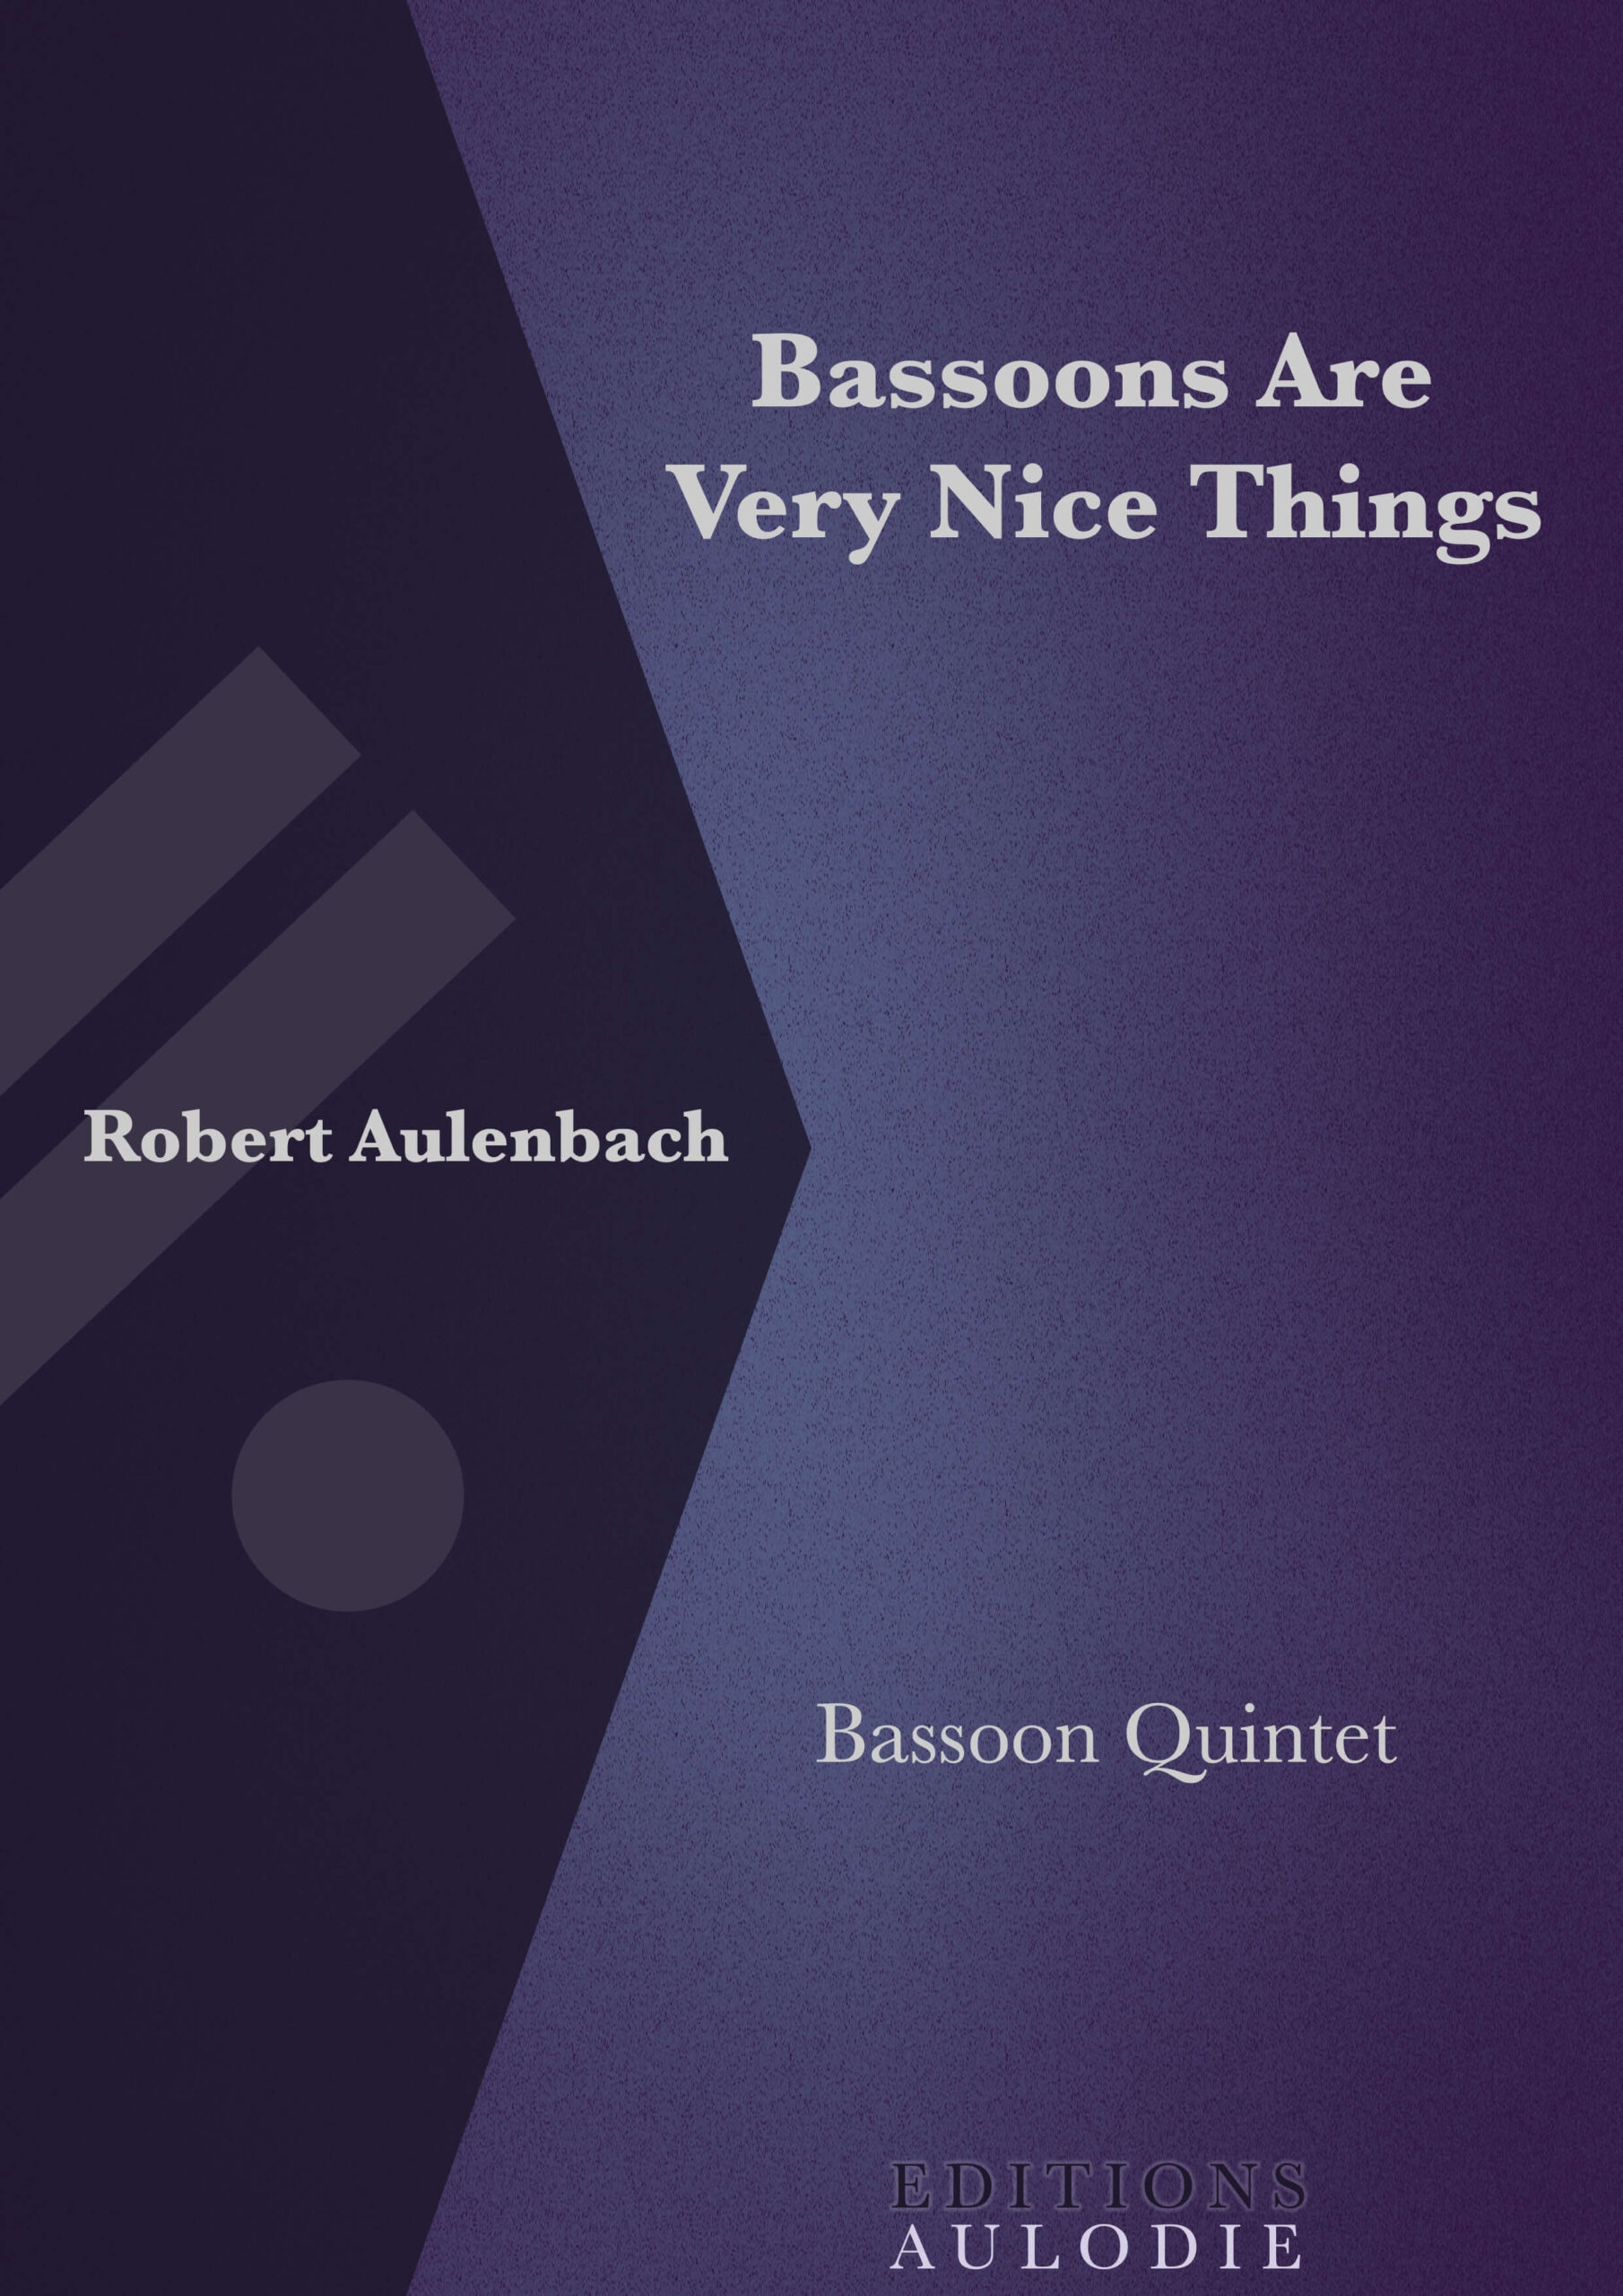 EA01018-Bassoons_Are_Very_Nice_Things-Robert_Aulenbach-Quintet